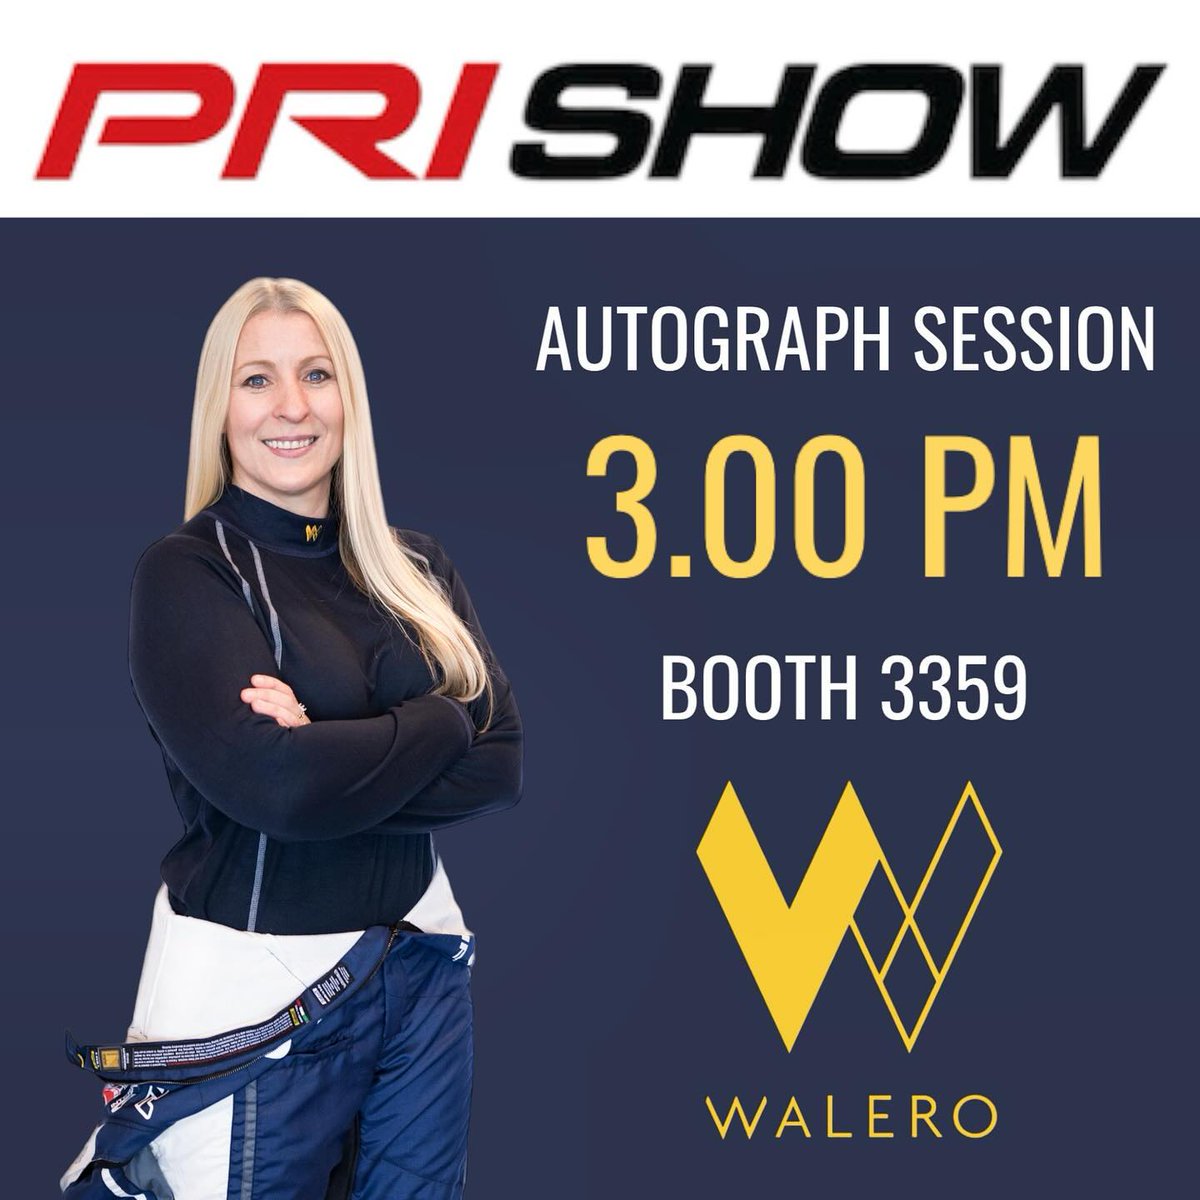 If you are heading to the @prishow today, be sure to head by booth 3359 for an autograph session with the wonderful @PippaMann at 3:00PM! 🙌💛 #WeAreWalero #GetTheEdge